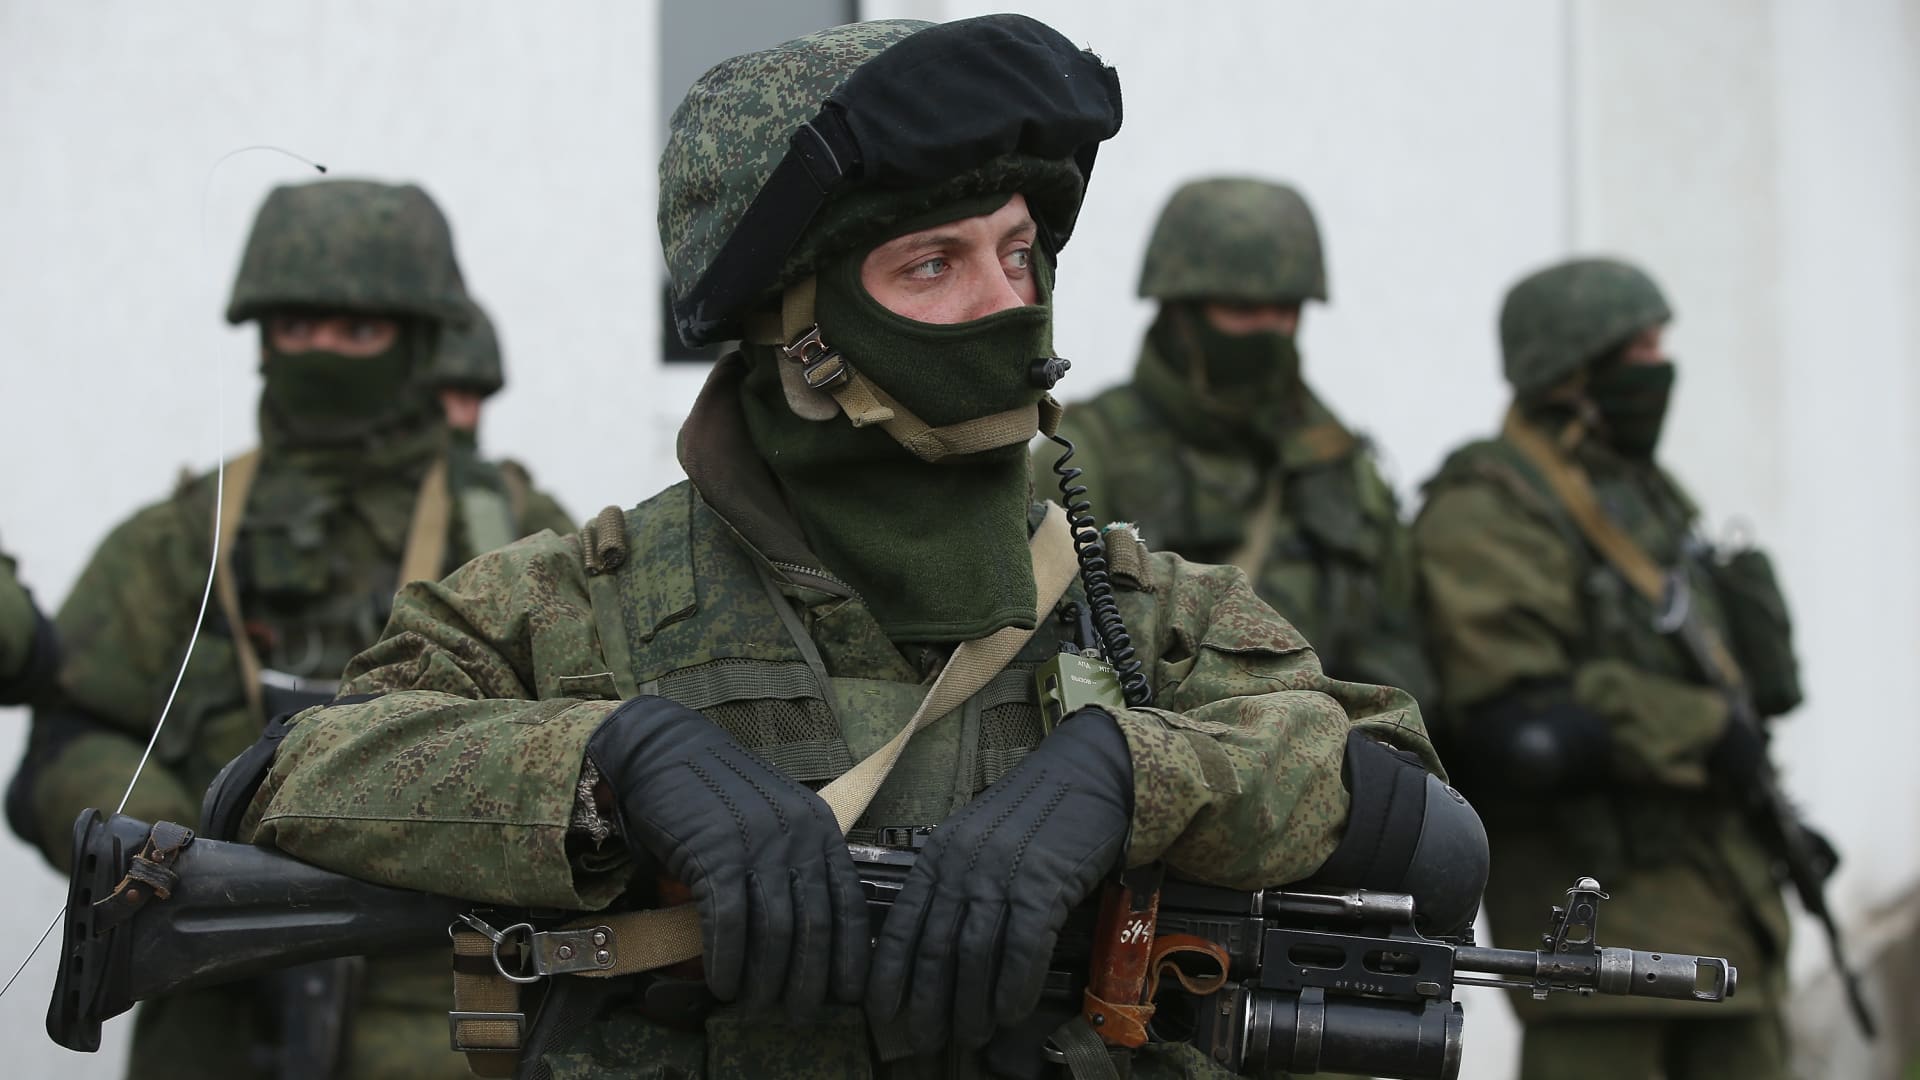 Soldiers who were among several hundred that took up positions around a Ukrainian military base stand near the base's periphery in Crimea on March 2, 2014 in Perevalne, Ukraine.